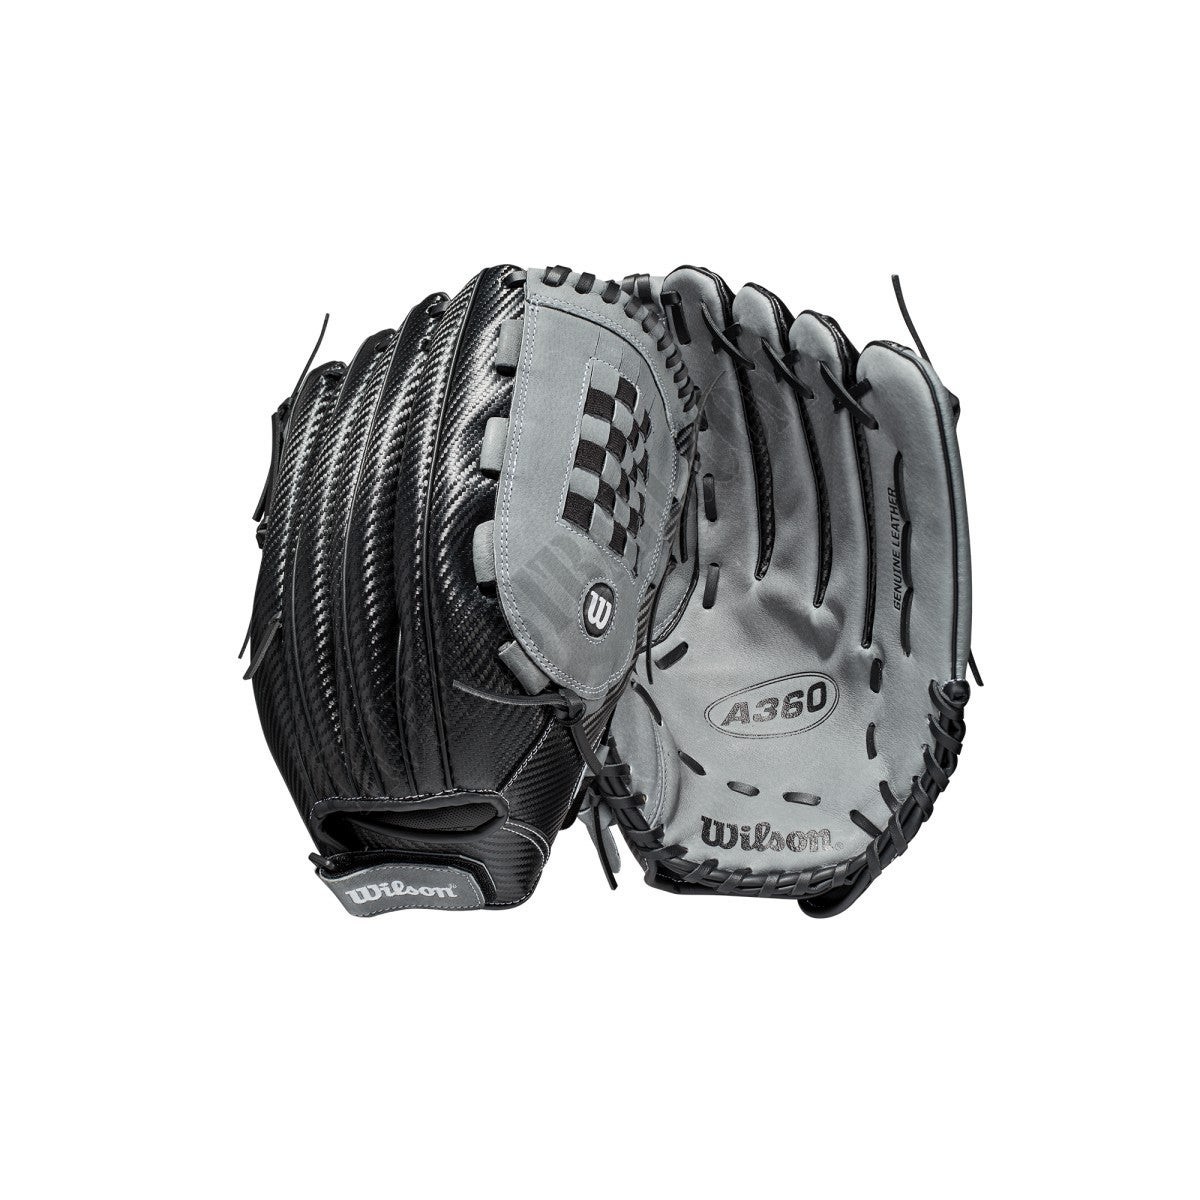 2021 A360 SP14 14" Slowpitch Softball Glove ● Wilson Promotions - -0